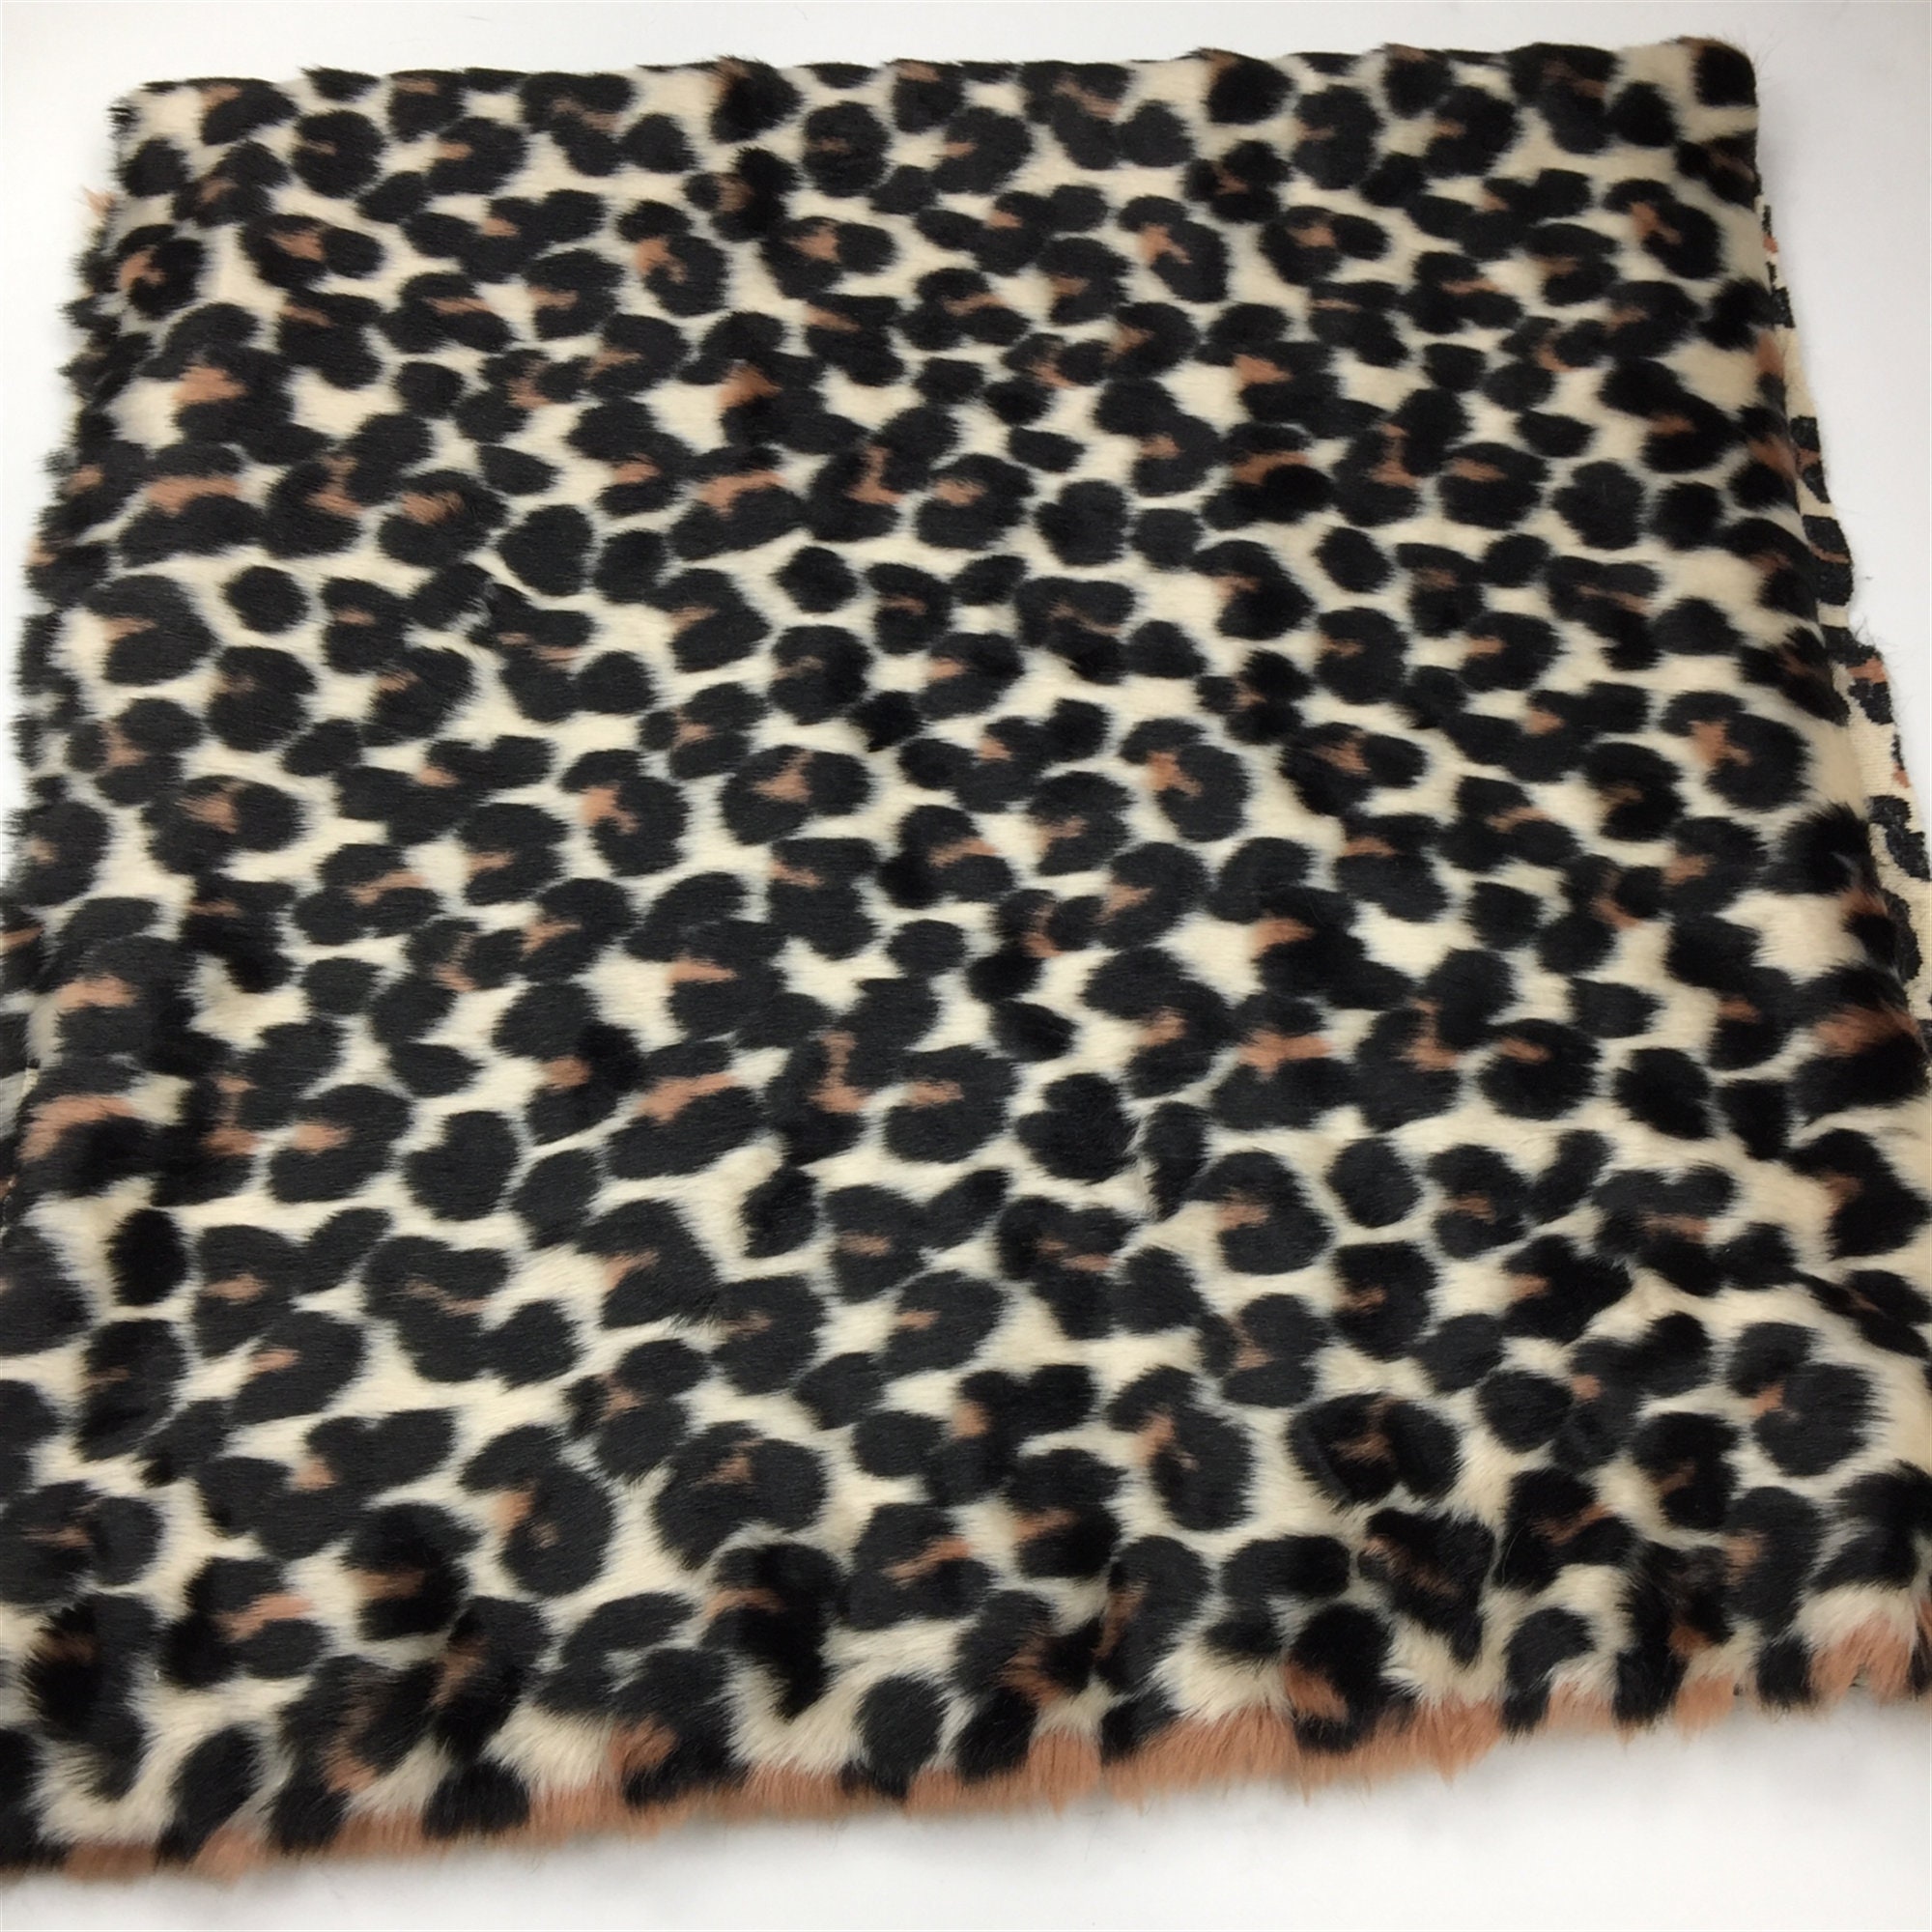 Thick Heavy Animal Faux Fur Fabric By The Yard Shaggy Long Pile 60 Width  Fake fur (Multi color Brown) Used for Blanket, jackets, coating